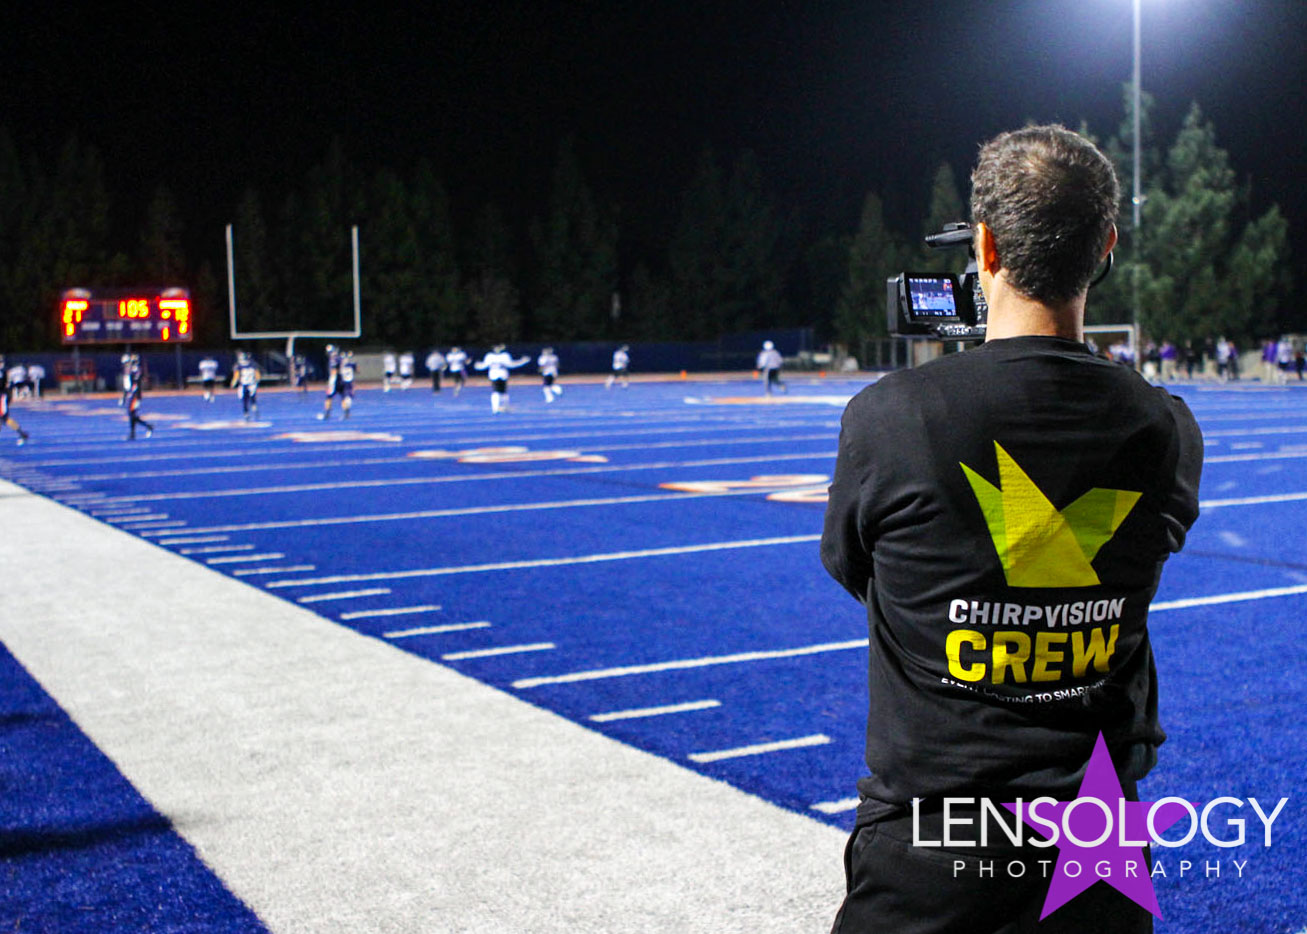 LENSOLOGY.NET - Promo shoot for communications company Chirpvision covering their system debut at a high school football final, LA, CA.
All images are copyright of Lensology.net
Email: info@lensology.net
www.lensology.net